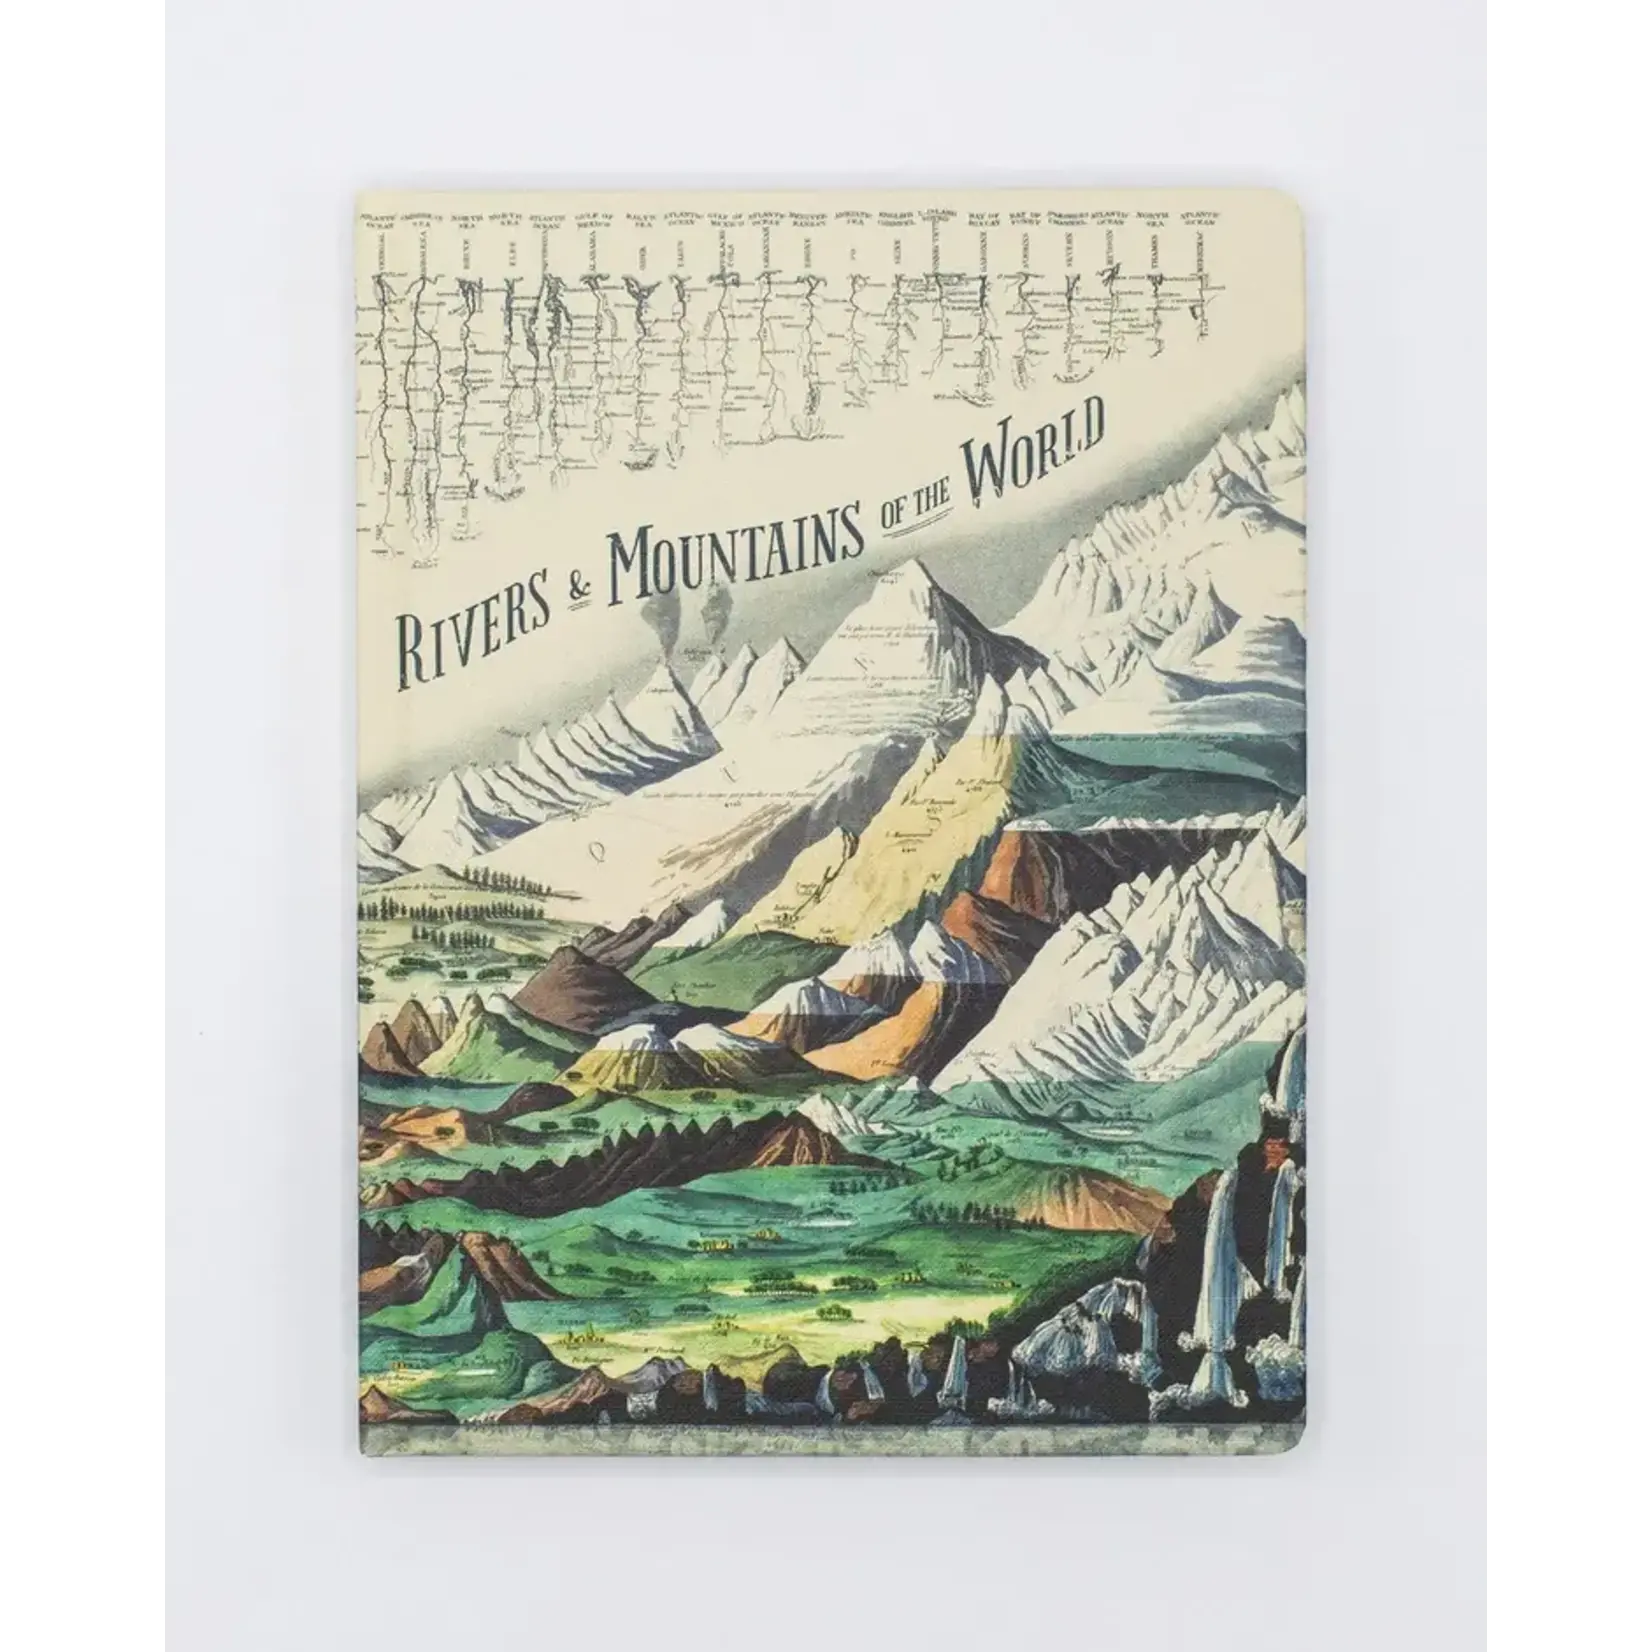 Cognitive Surplus Blank Notebook - Rivers & Mountains